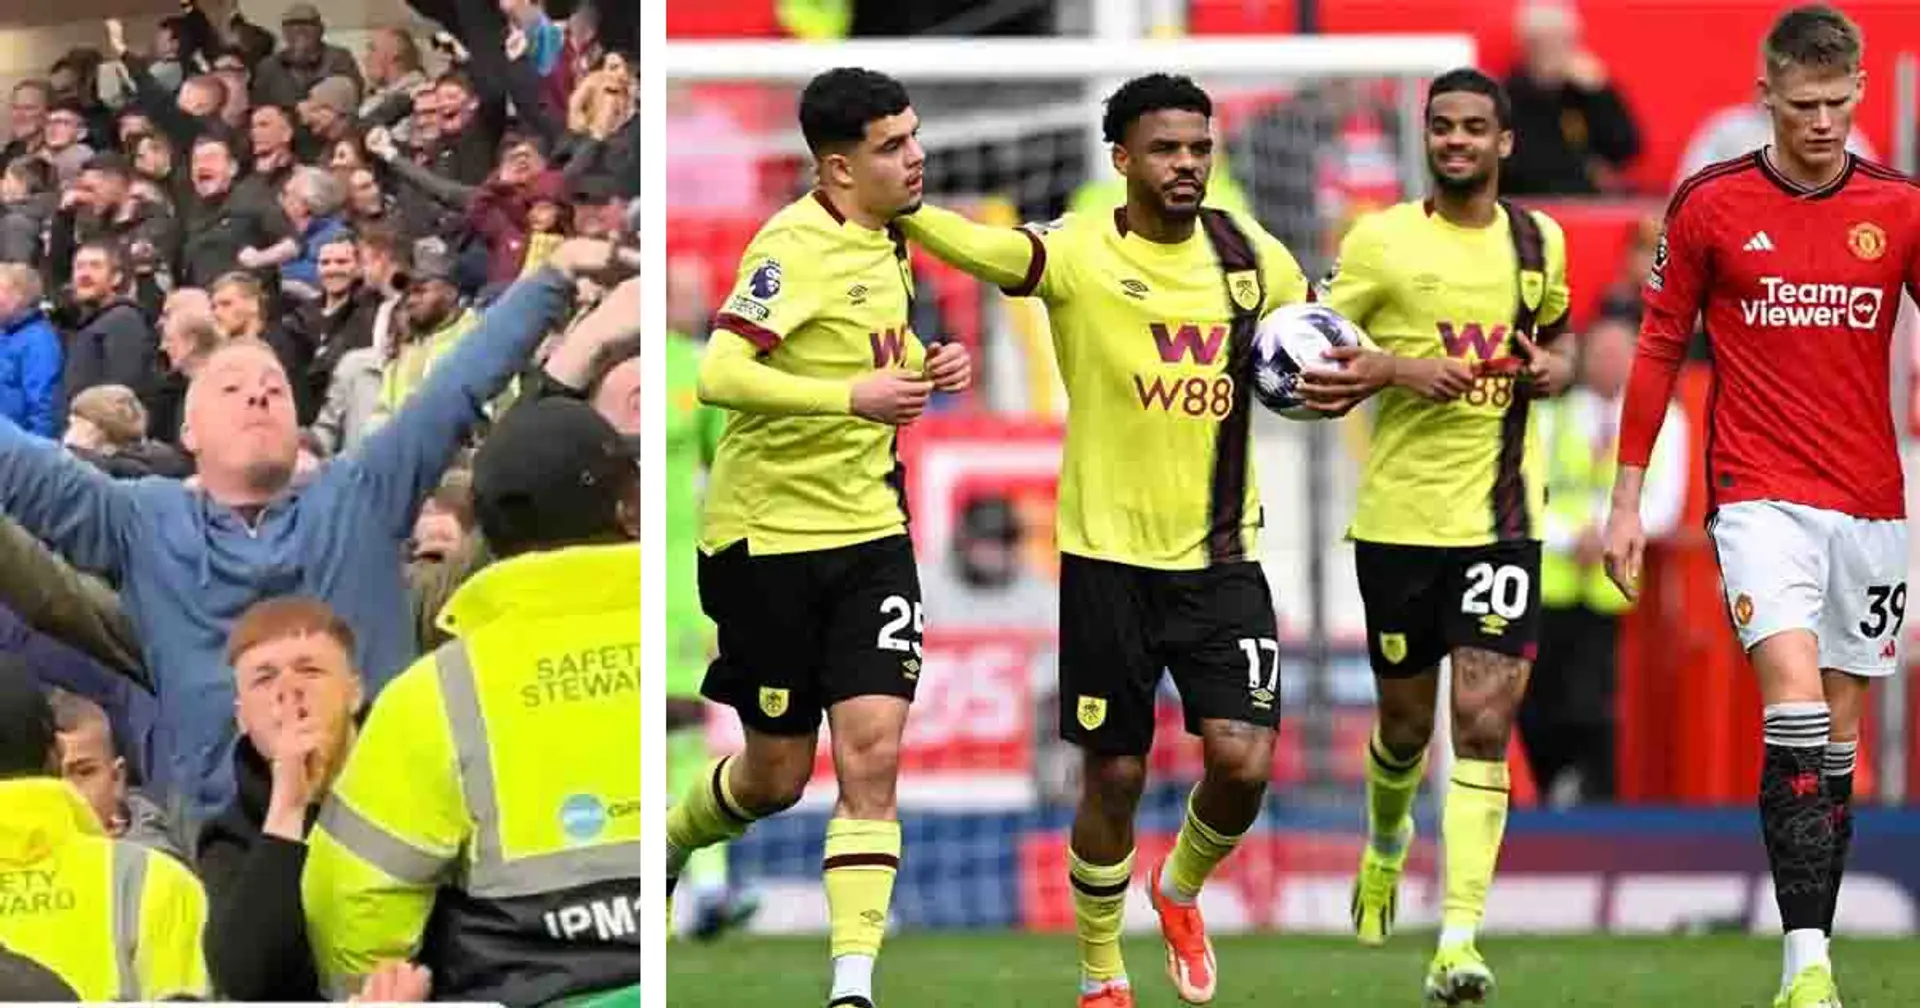 Burnley make statement after their fan caught mocking Munich tragedy at Old Trafford